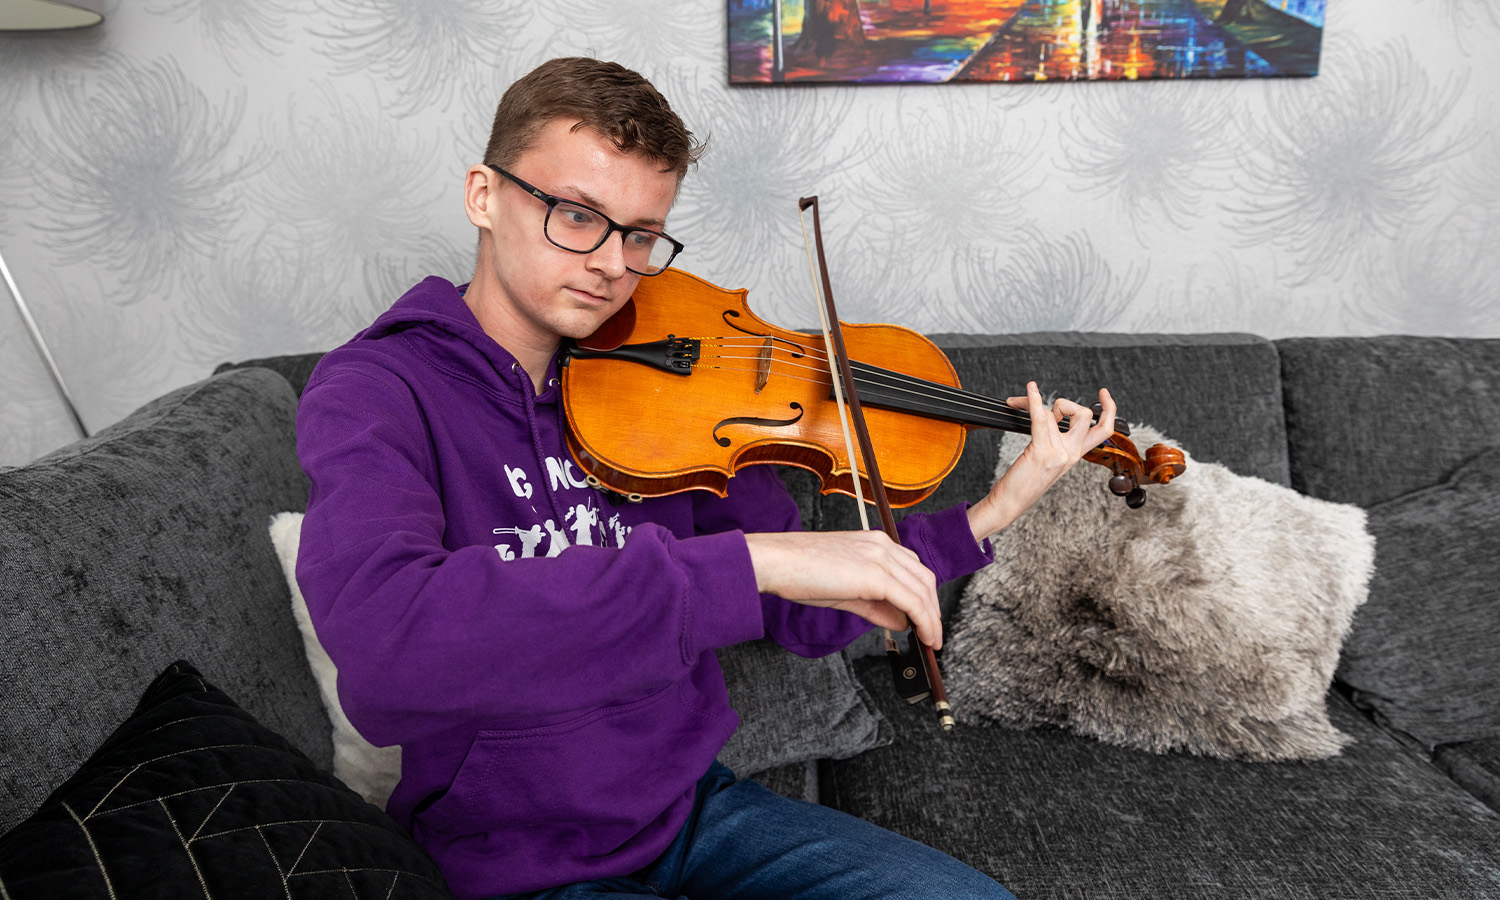 Aiden practicing his viola technique at home